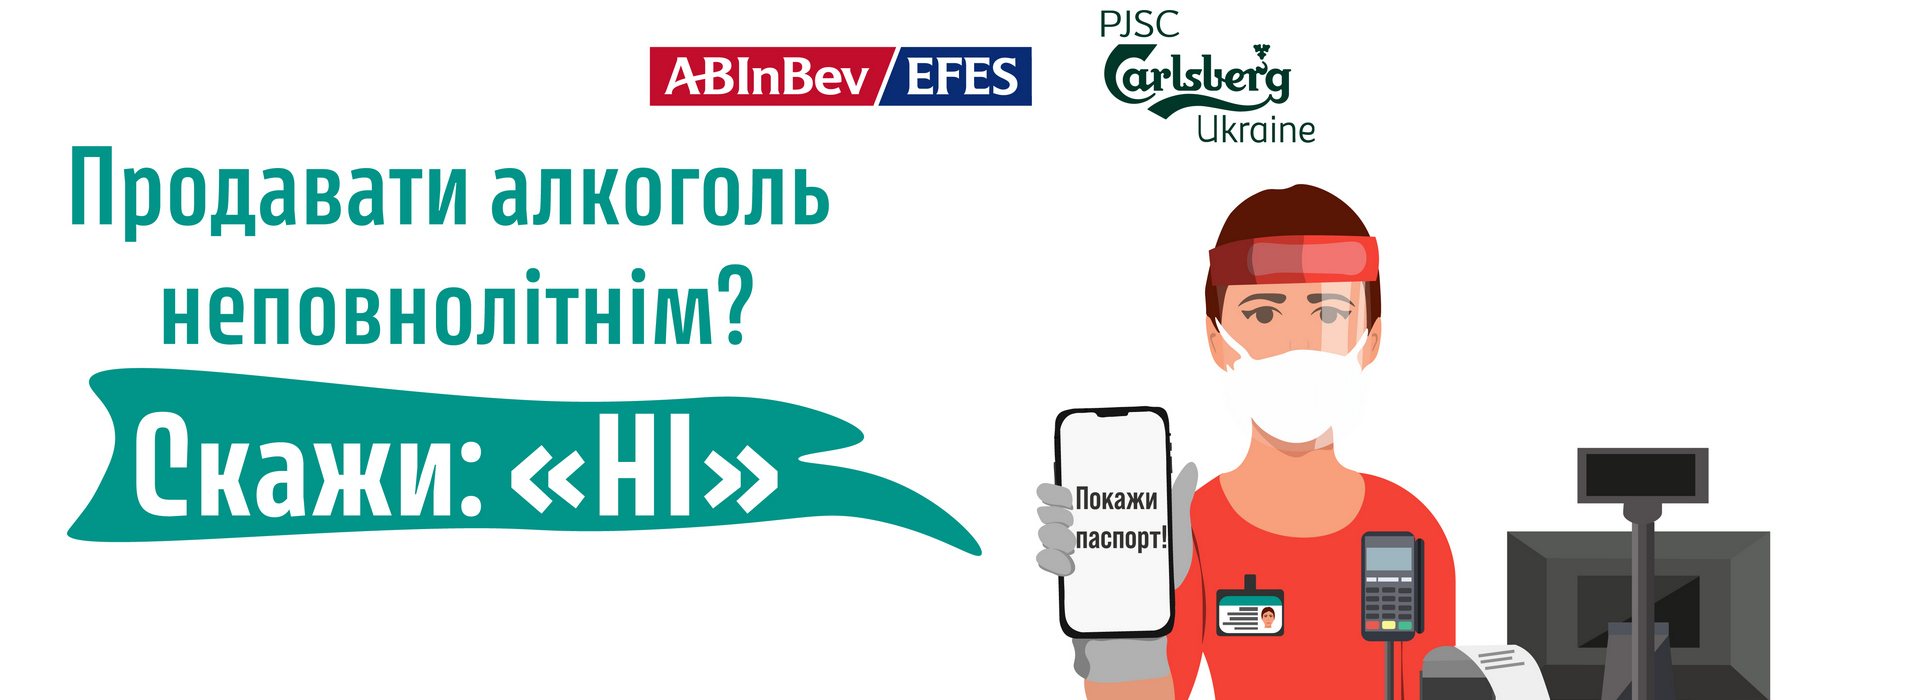 Carlsberg Ukraine Has Teamed Up with Partners to Once Again Say “No” to Alcohol for Minors